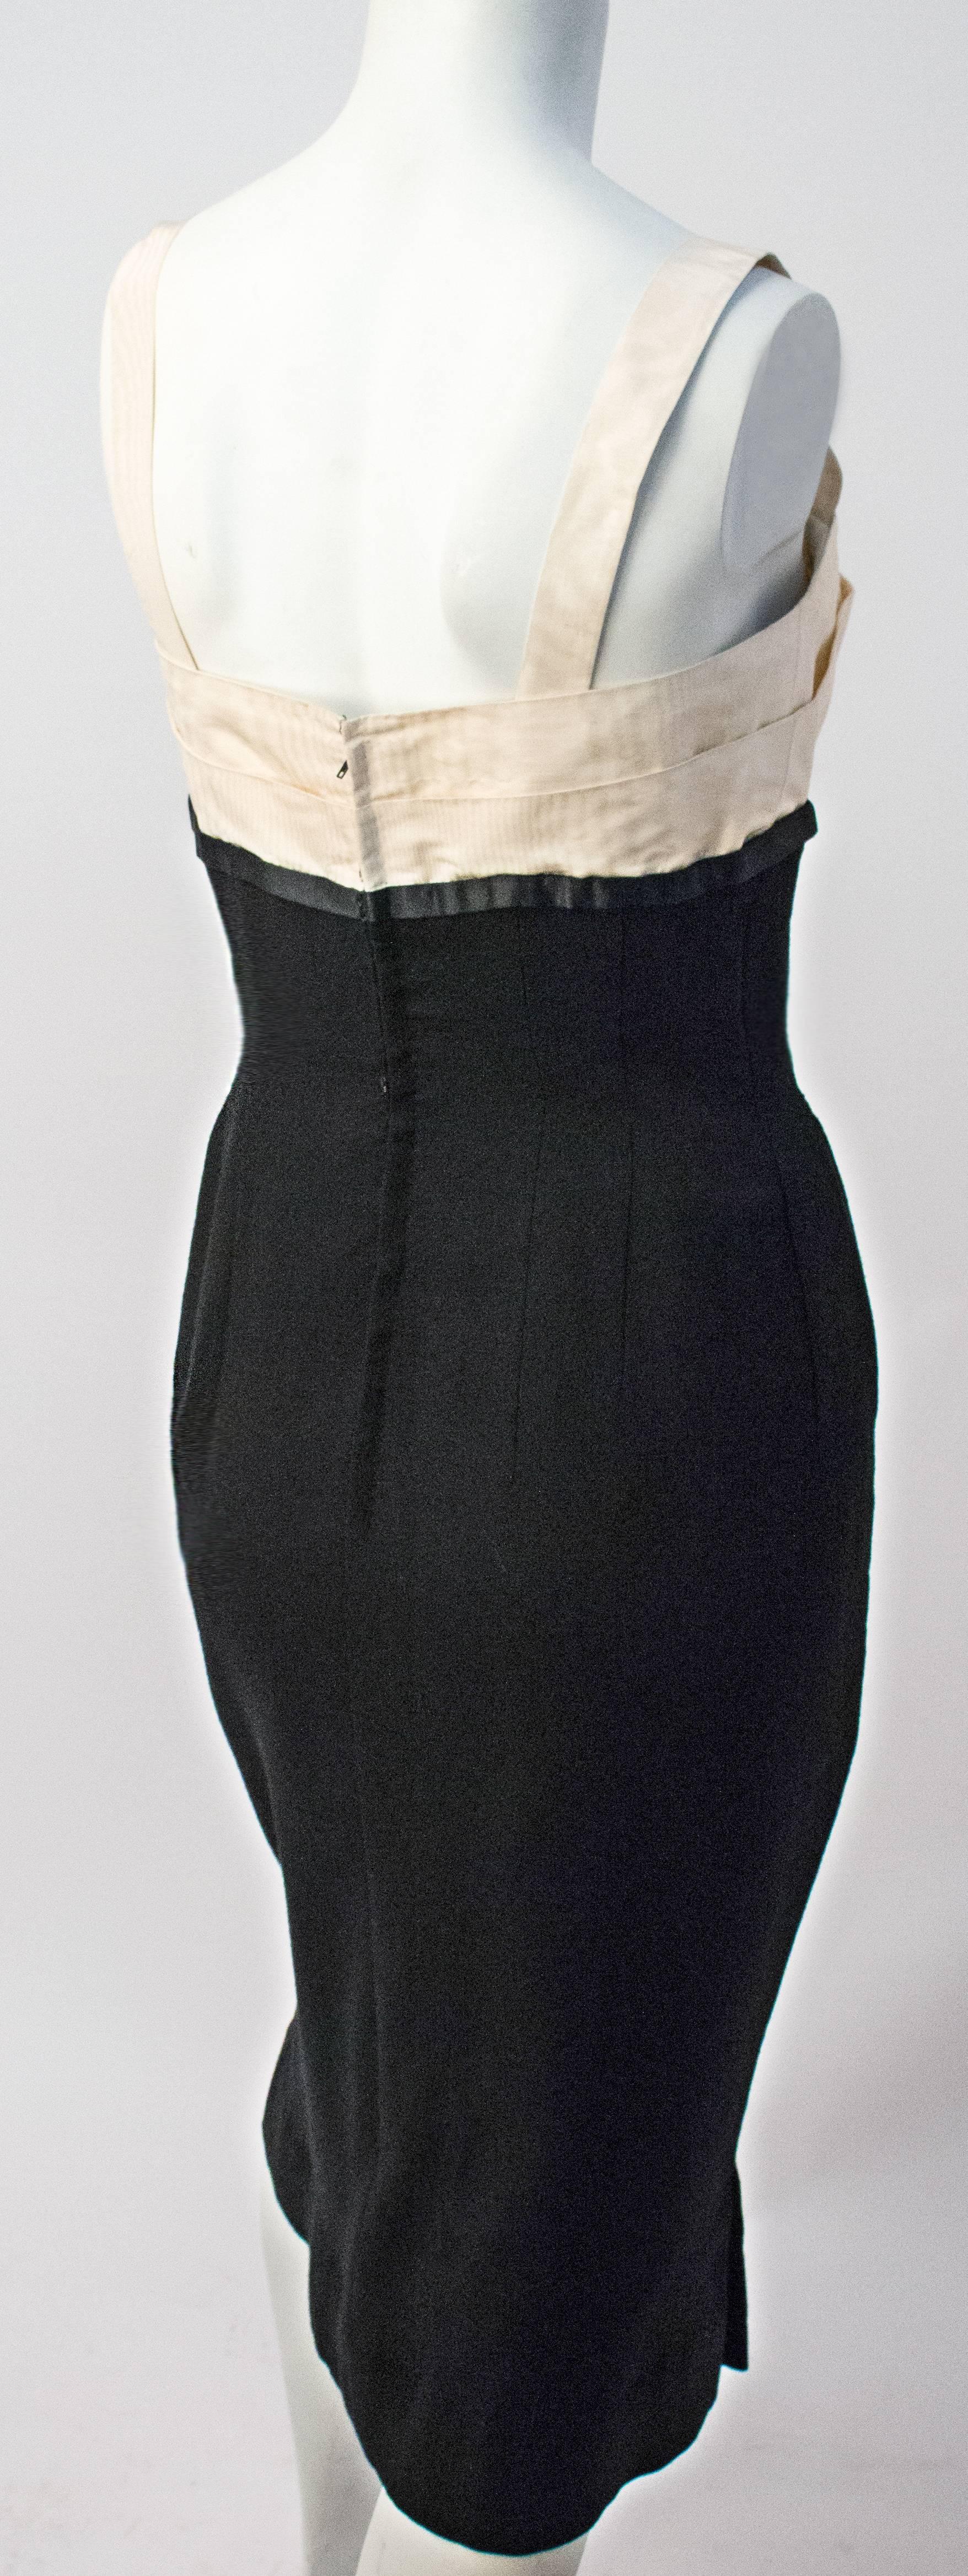 50s Howard Greer Black and White Cocktail Dress. White silk moire bodice, silk satin trim and bow detail at bust. Black wool gaberdine skirt. Fully lined, boned bodice. Hand finished. metal back zip and hook and eye closures. 

Designer to major